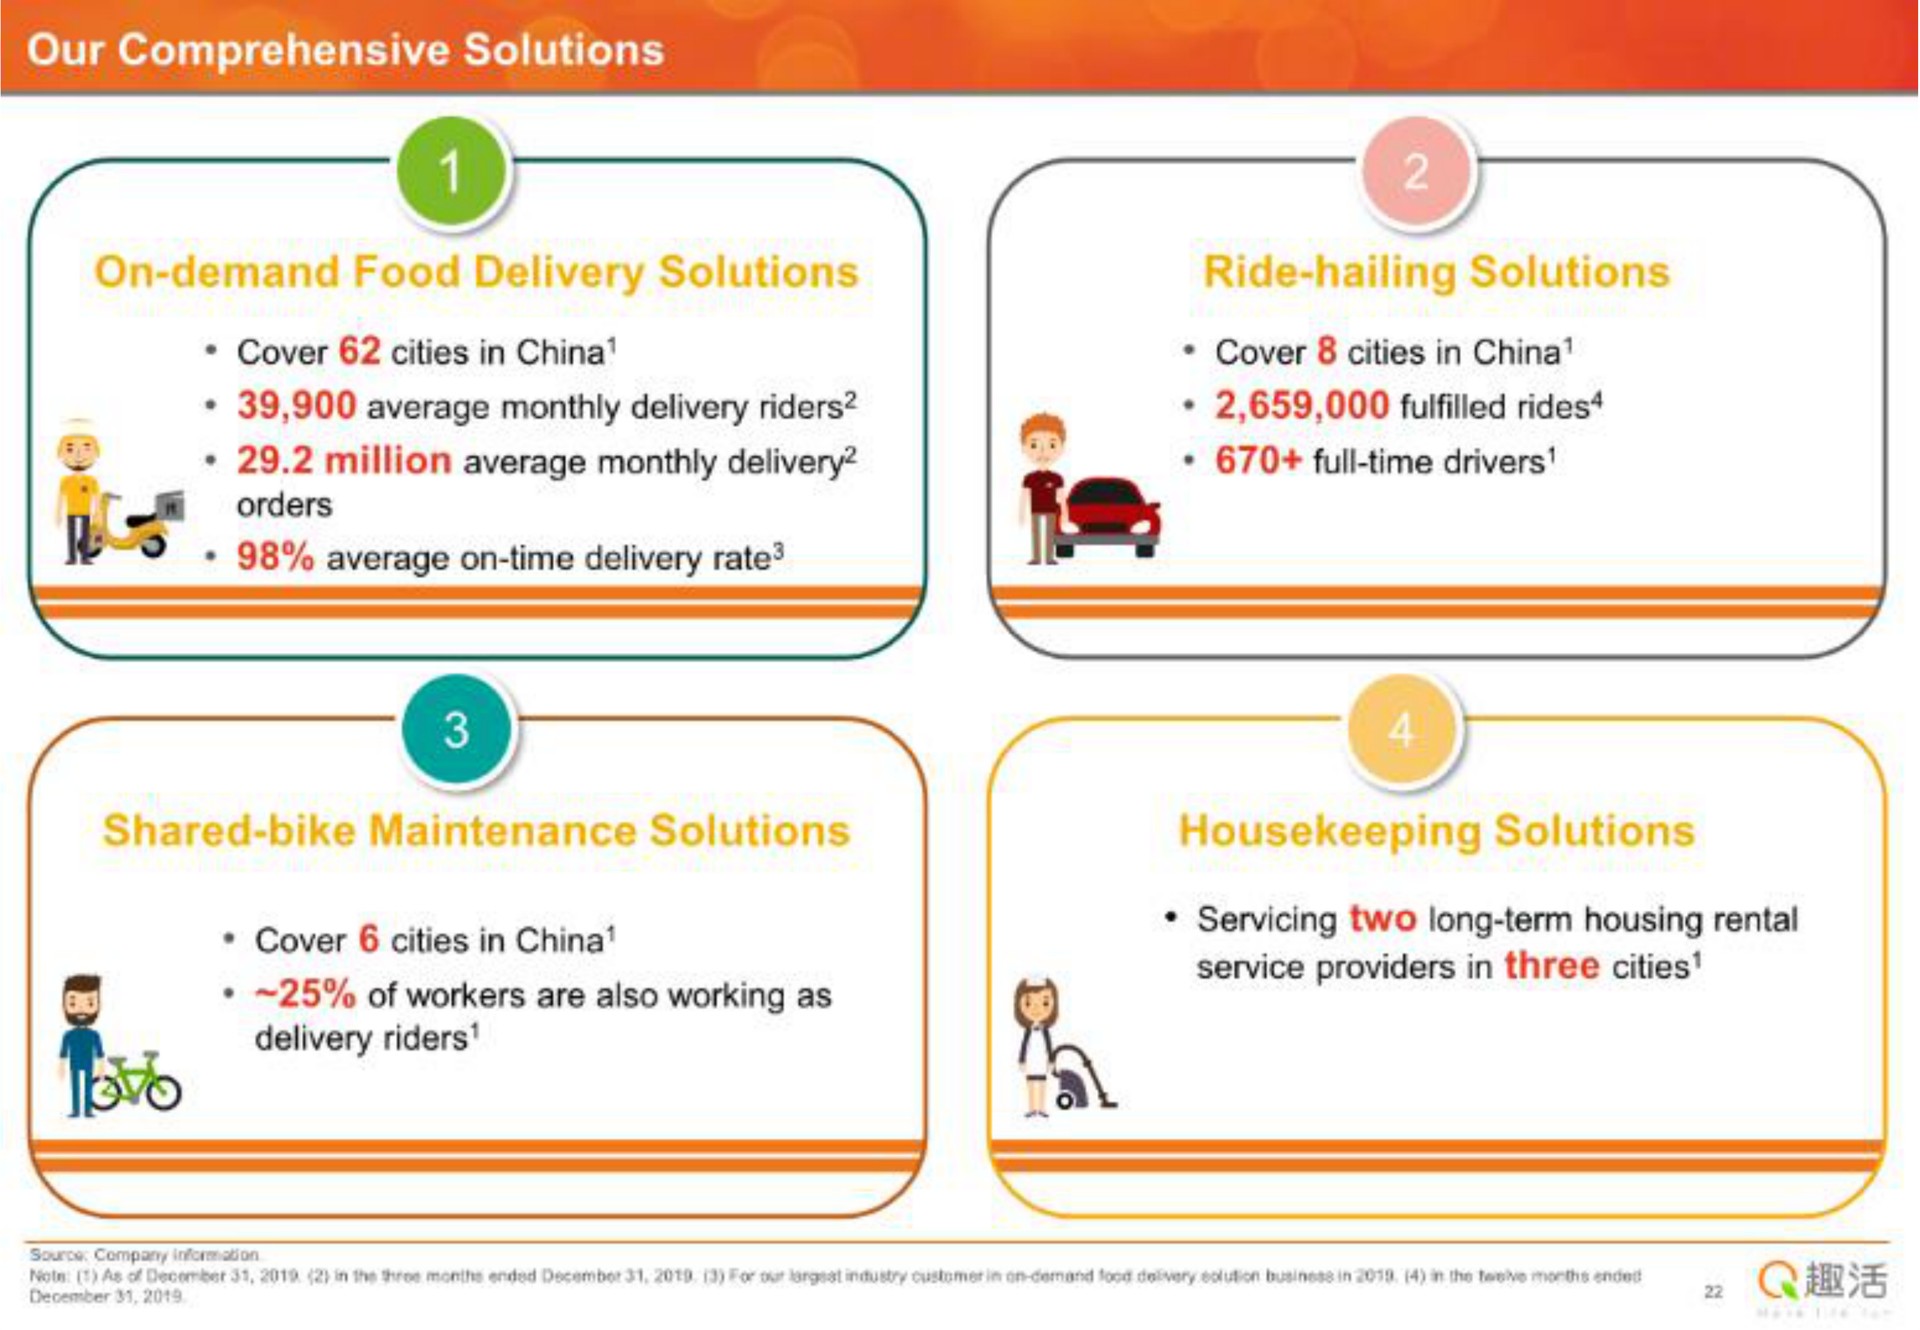 our comprehensive solutions on demand food delivery solutions ride hailing solutions cover cities in china rides full time drivers cover cities in china average monthly delivery riders million average monthly delivery on pad average on time delivery rate delivery riders shared bike maintenance solutions servicing two long term housing rental of workers are also working as housekeeping solutions service providers in three cities cover cities in china | Quhuo